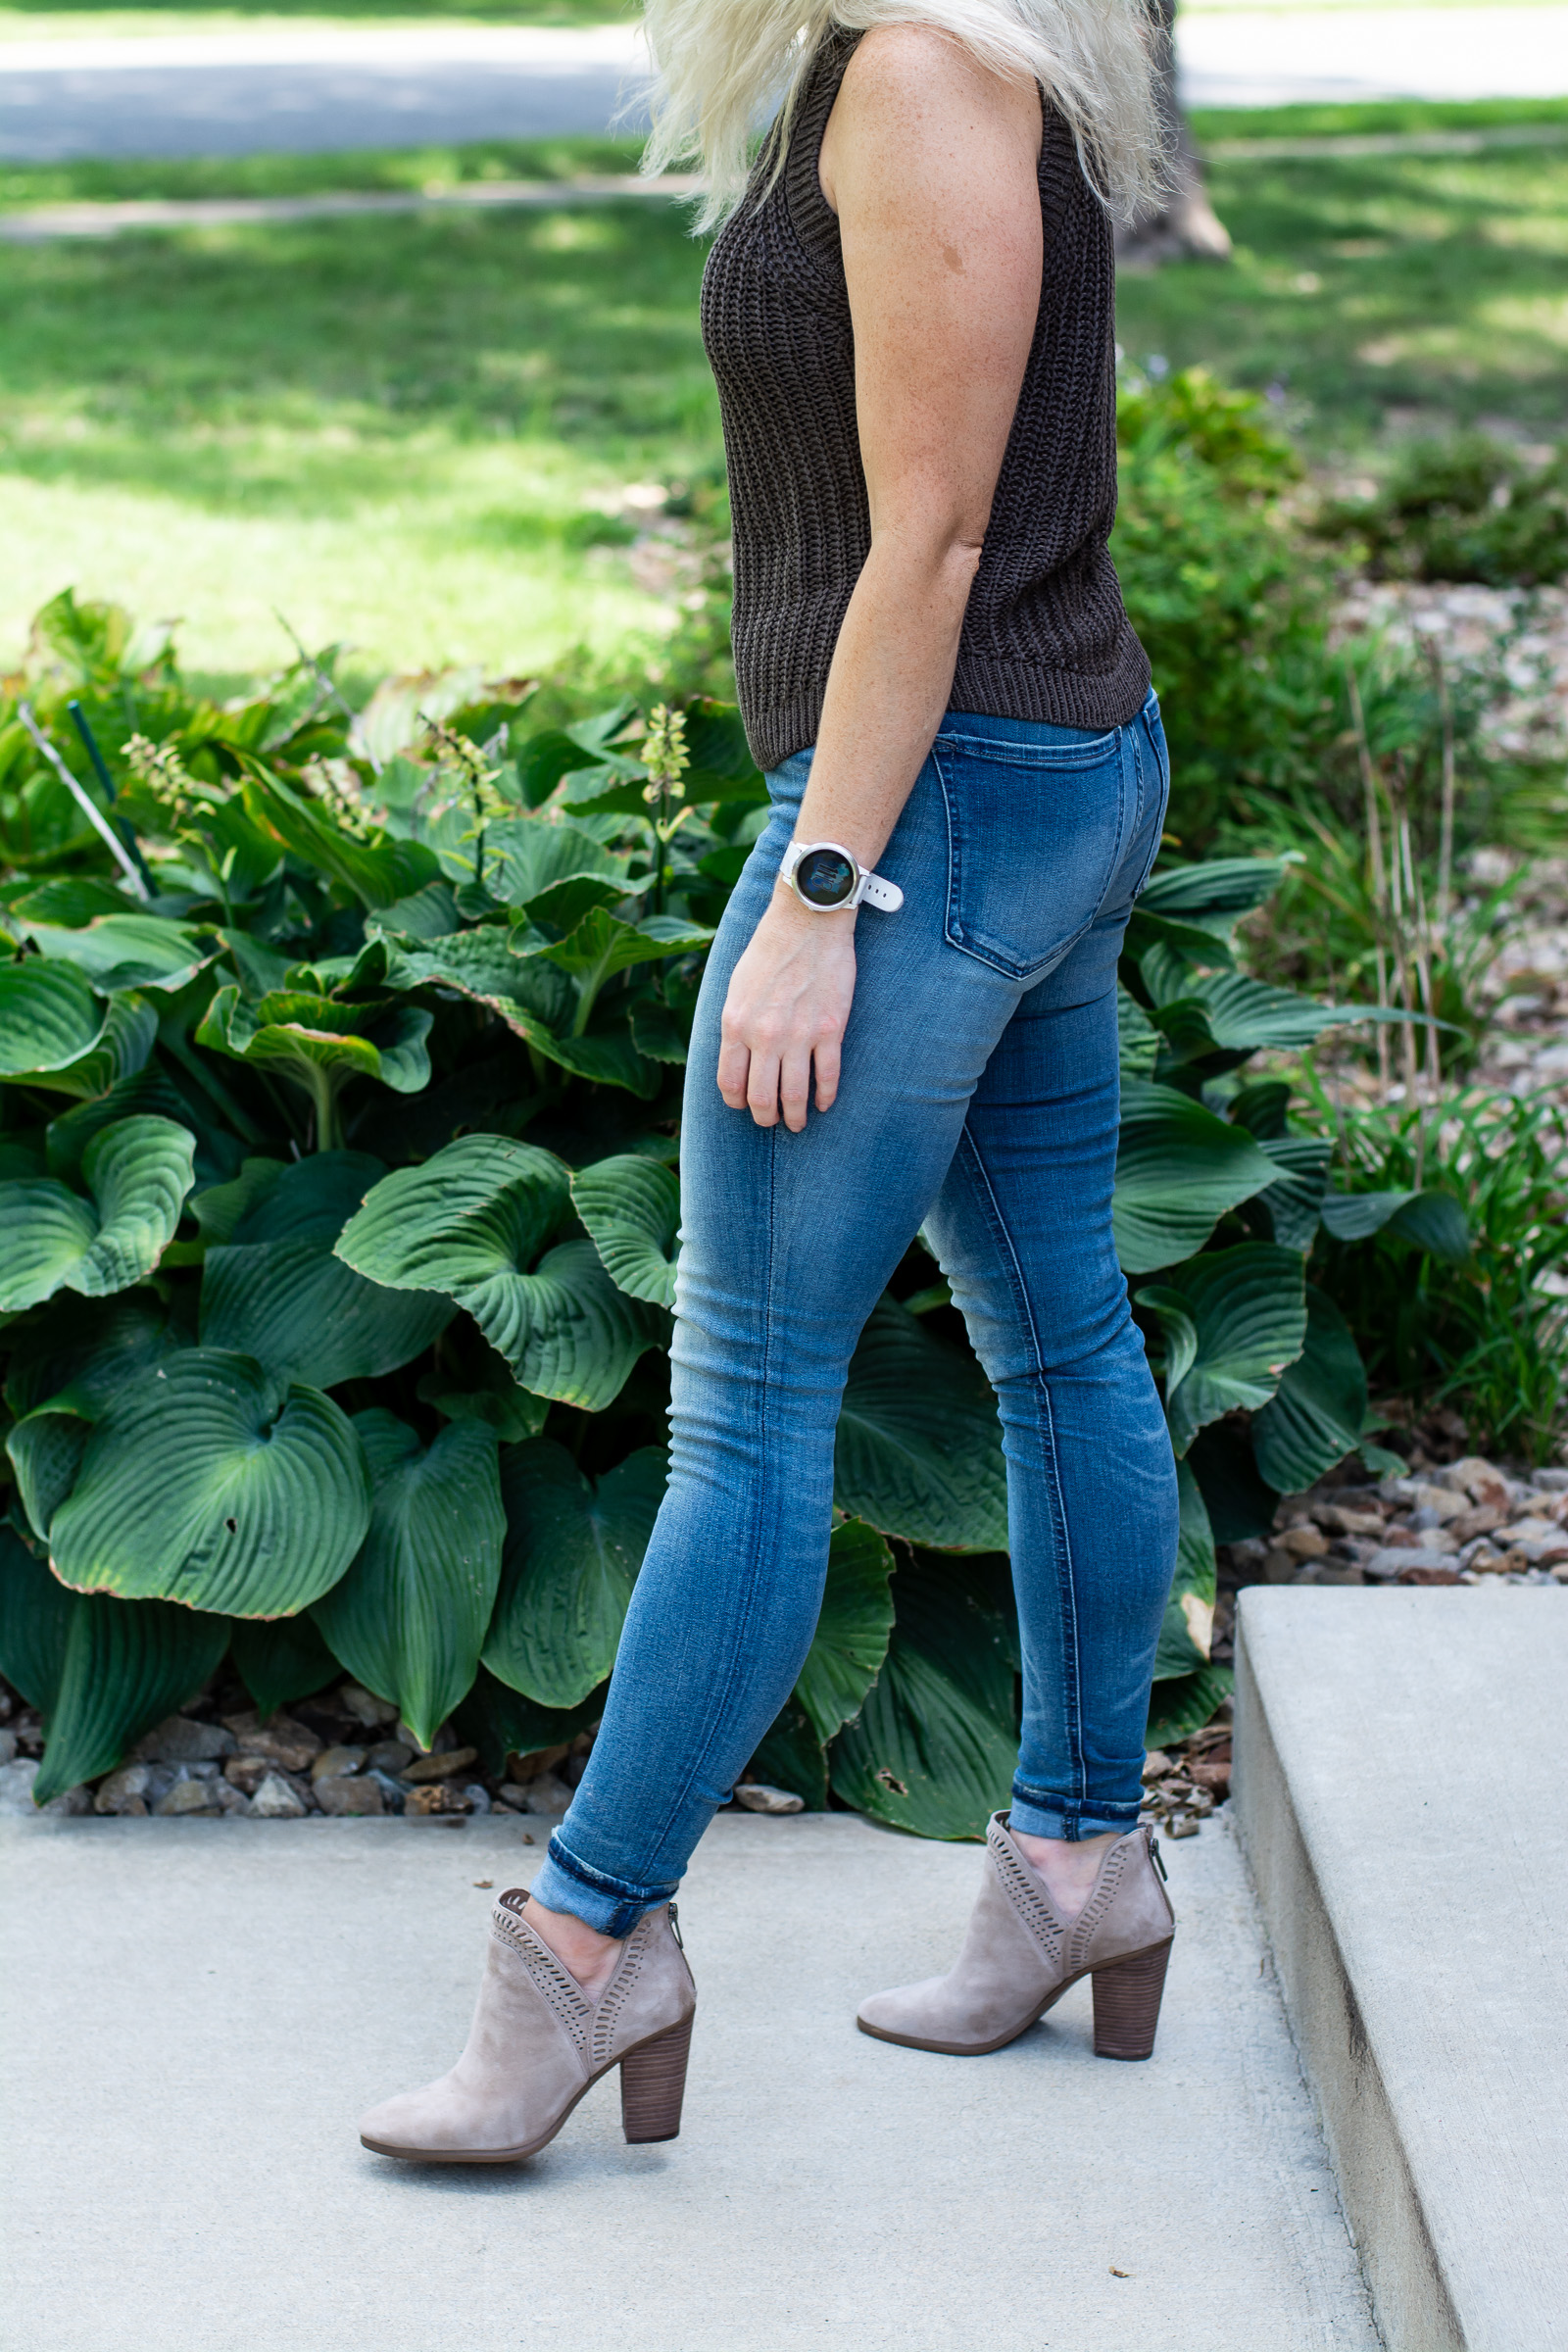 Transitional Outfit: Summer Sweater + Ankle Boots. | Ashley from LSR